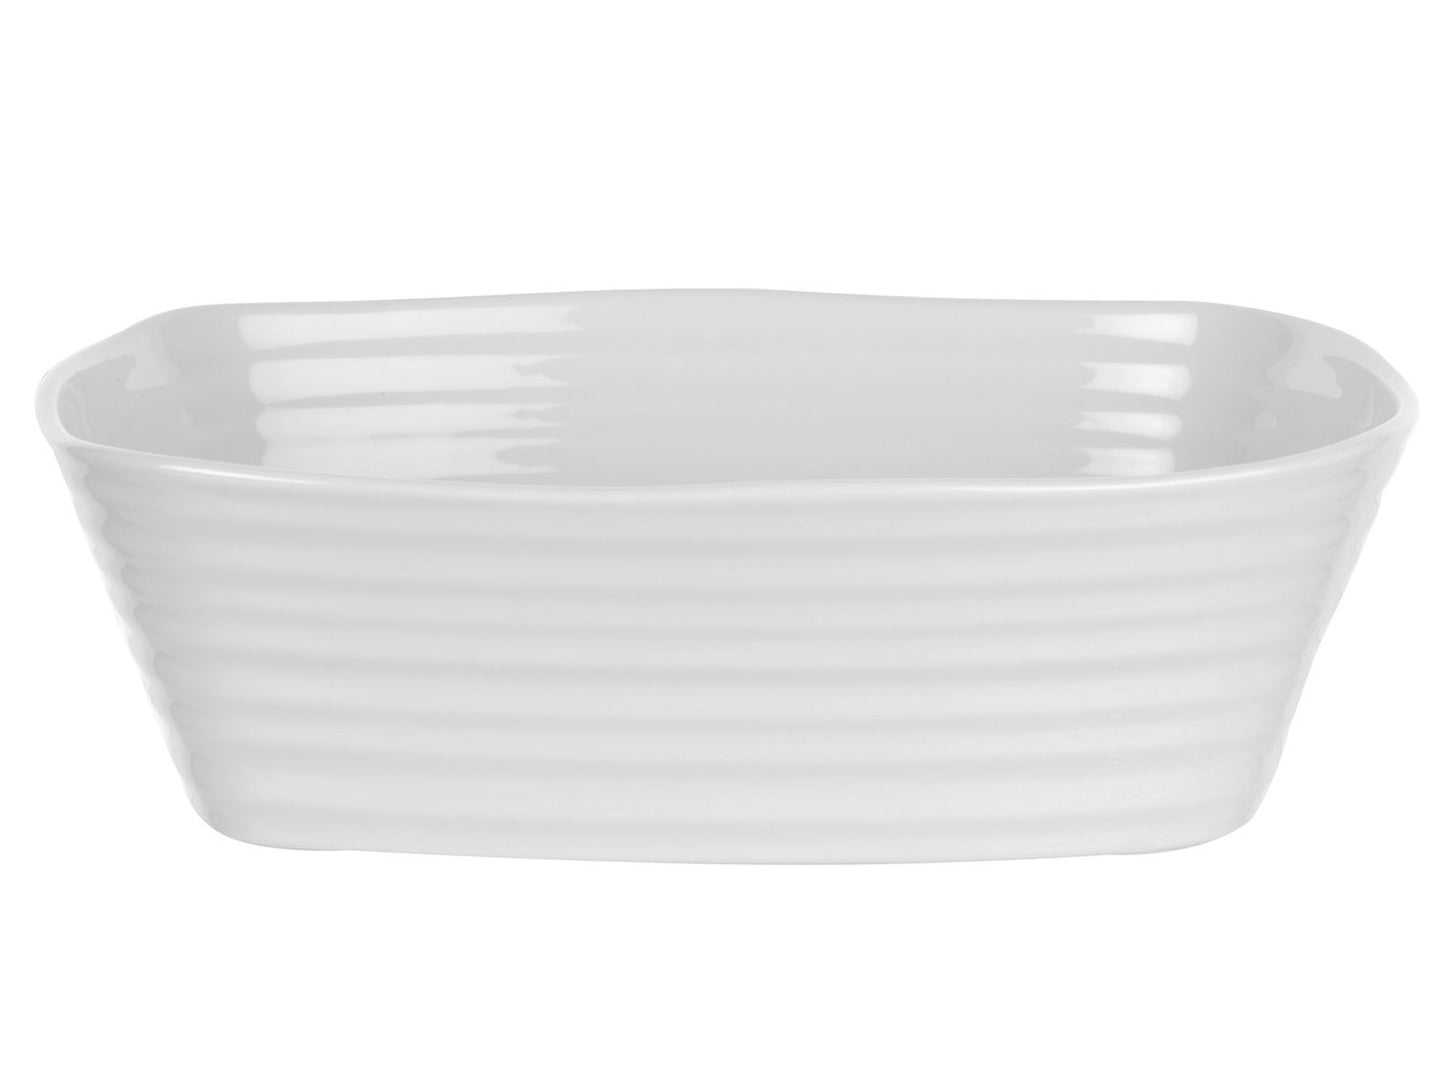 This Sophie Conran Small Rectangular Roasting Dish is idea for preparing side dishes such as roasted vegetables or a meal for one. Designed with a ripple effect, the piece has been finished with a clear glaze over the white ceramic, and is microwave, dishwasher and freezer safe.